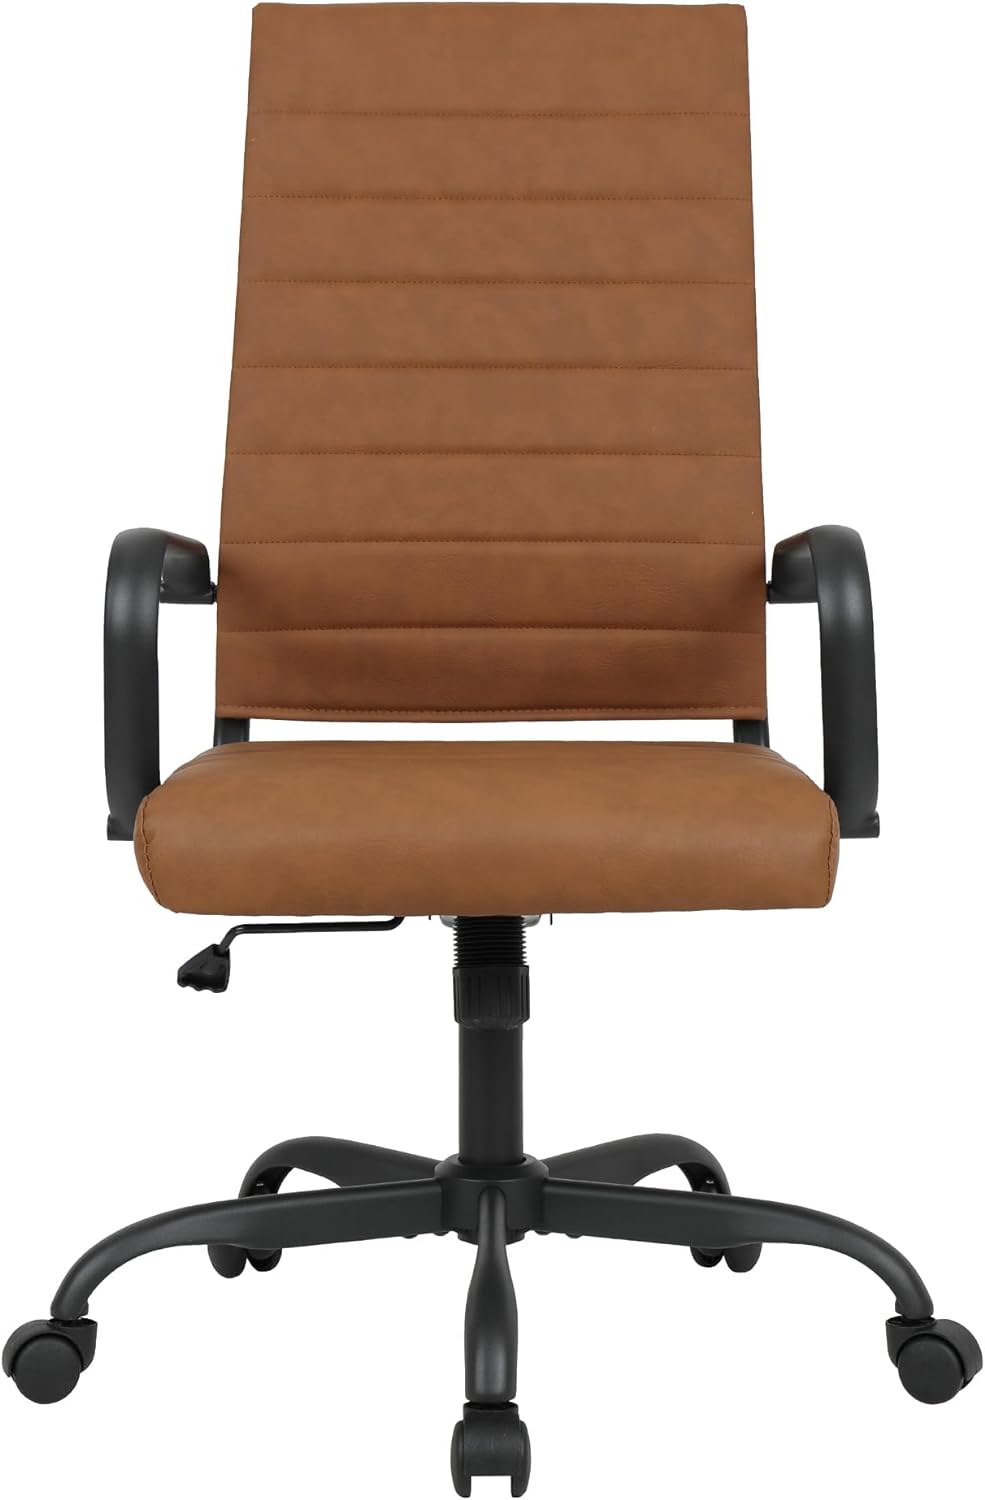 LANDSUN Home Office Chair High Back Executive Chair Ribbed Leather Computer Desk Chair with Armrests Soft Pad Adjustable Height Swivel Conference Brown Black